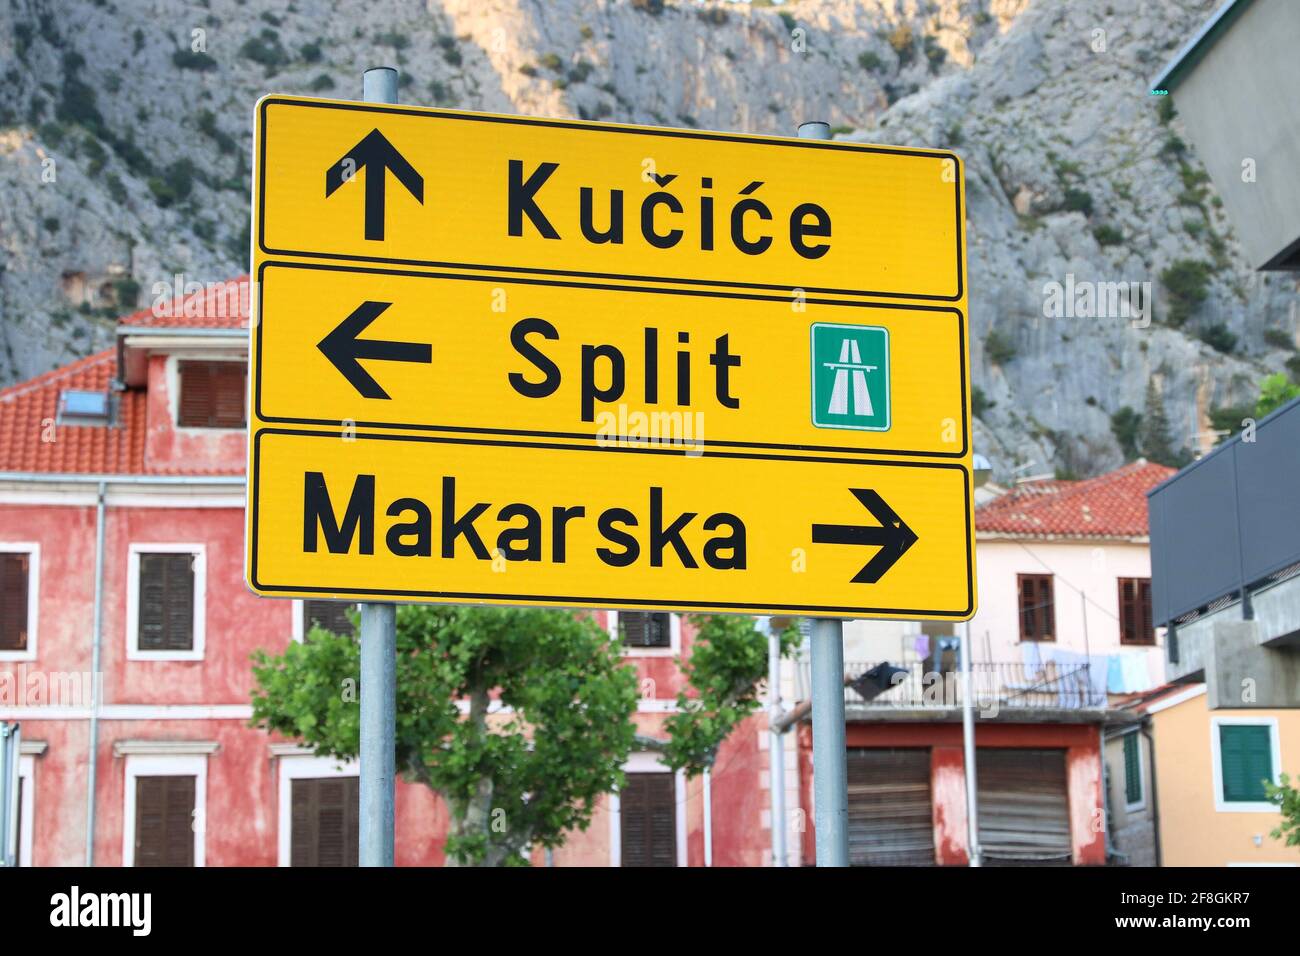 Direction signs in Croatia. Road directions to Makarska, Split and Kucice. Stock Photo